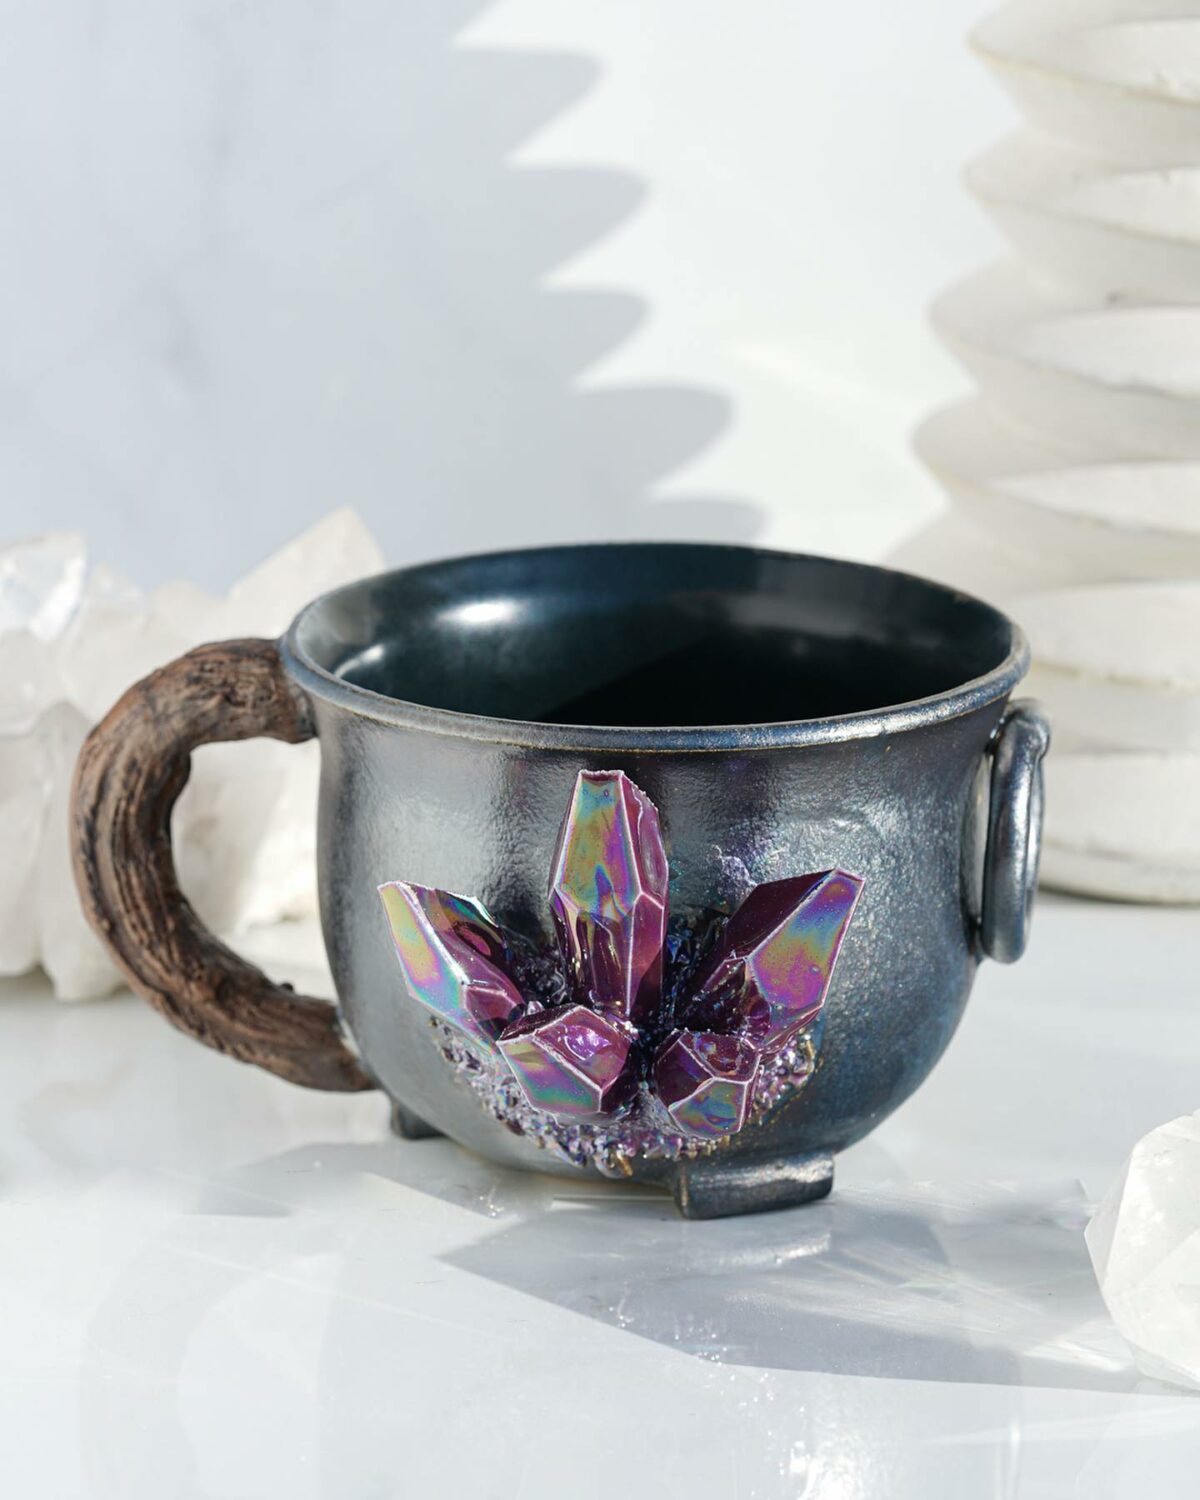 Lush Ceramic Vessels Decorated With Colorful Crystals By Collin Lynch 13 1